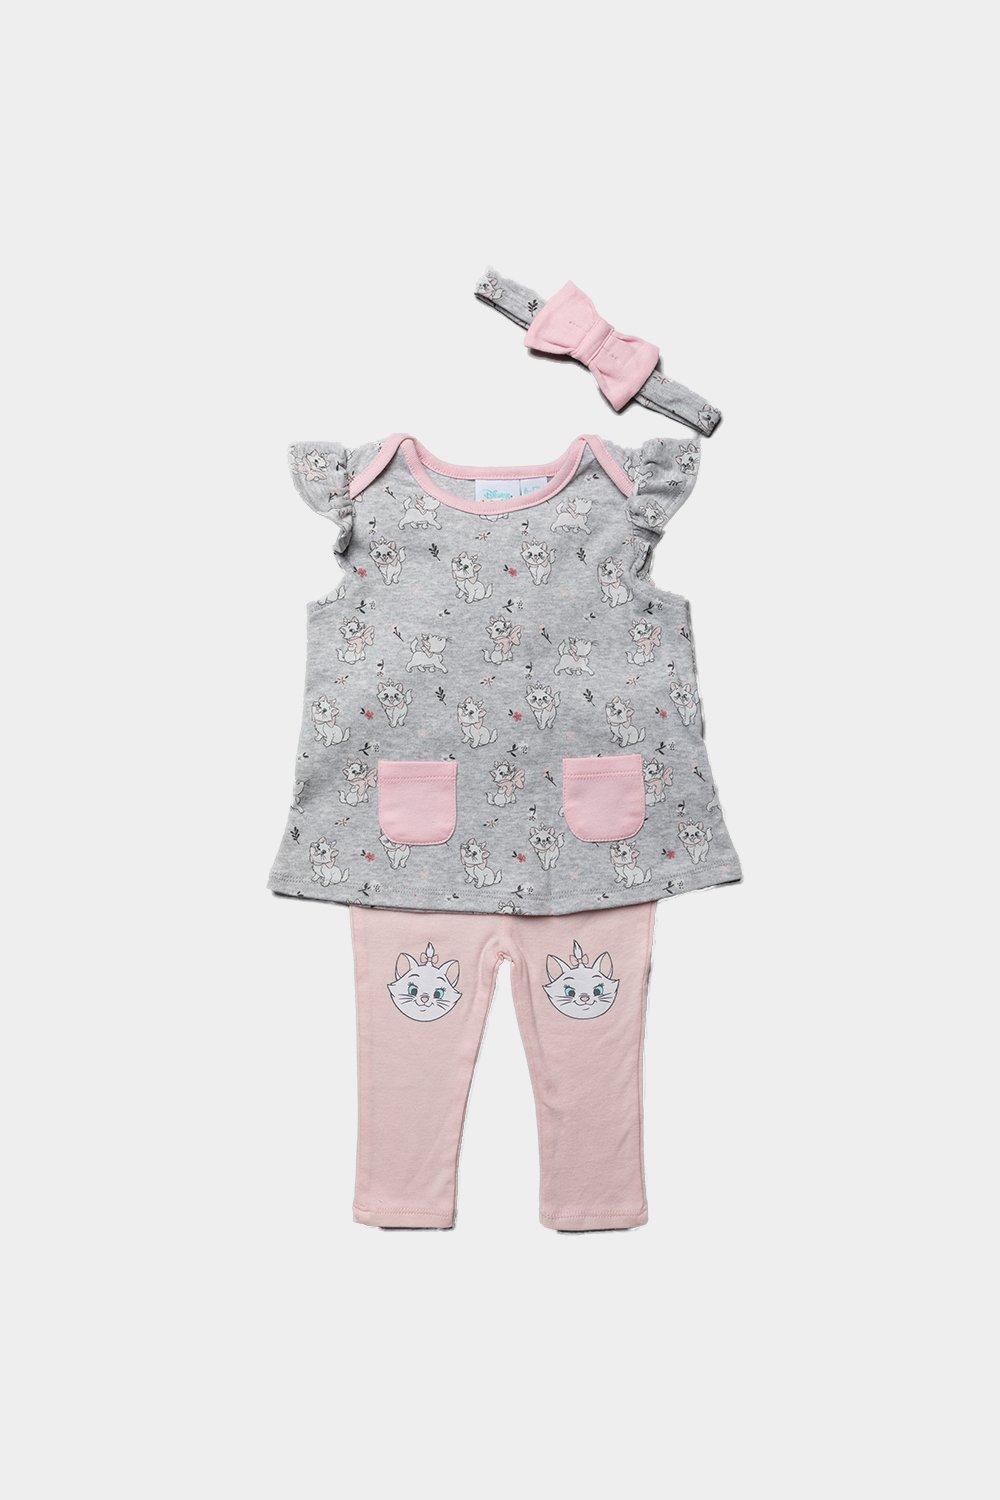 Disney Baby Women's Marie 3-Piece Outfit|Size: 18-24 m|pink